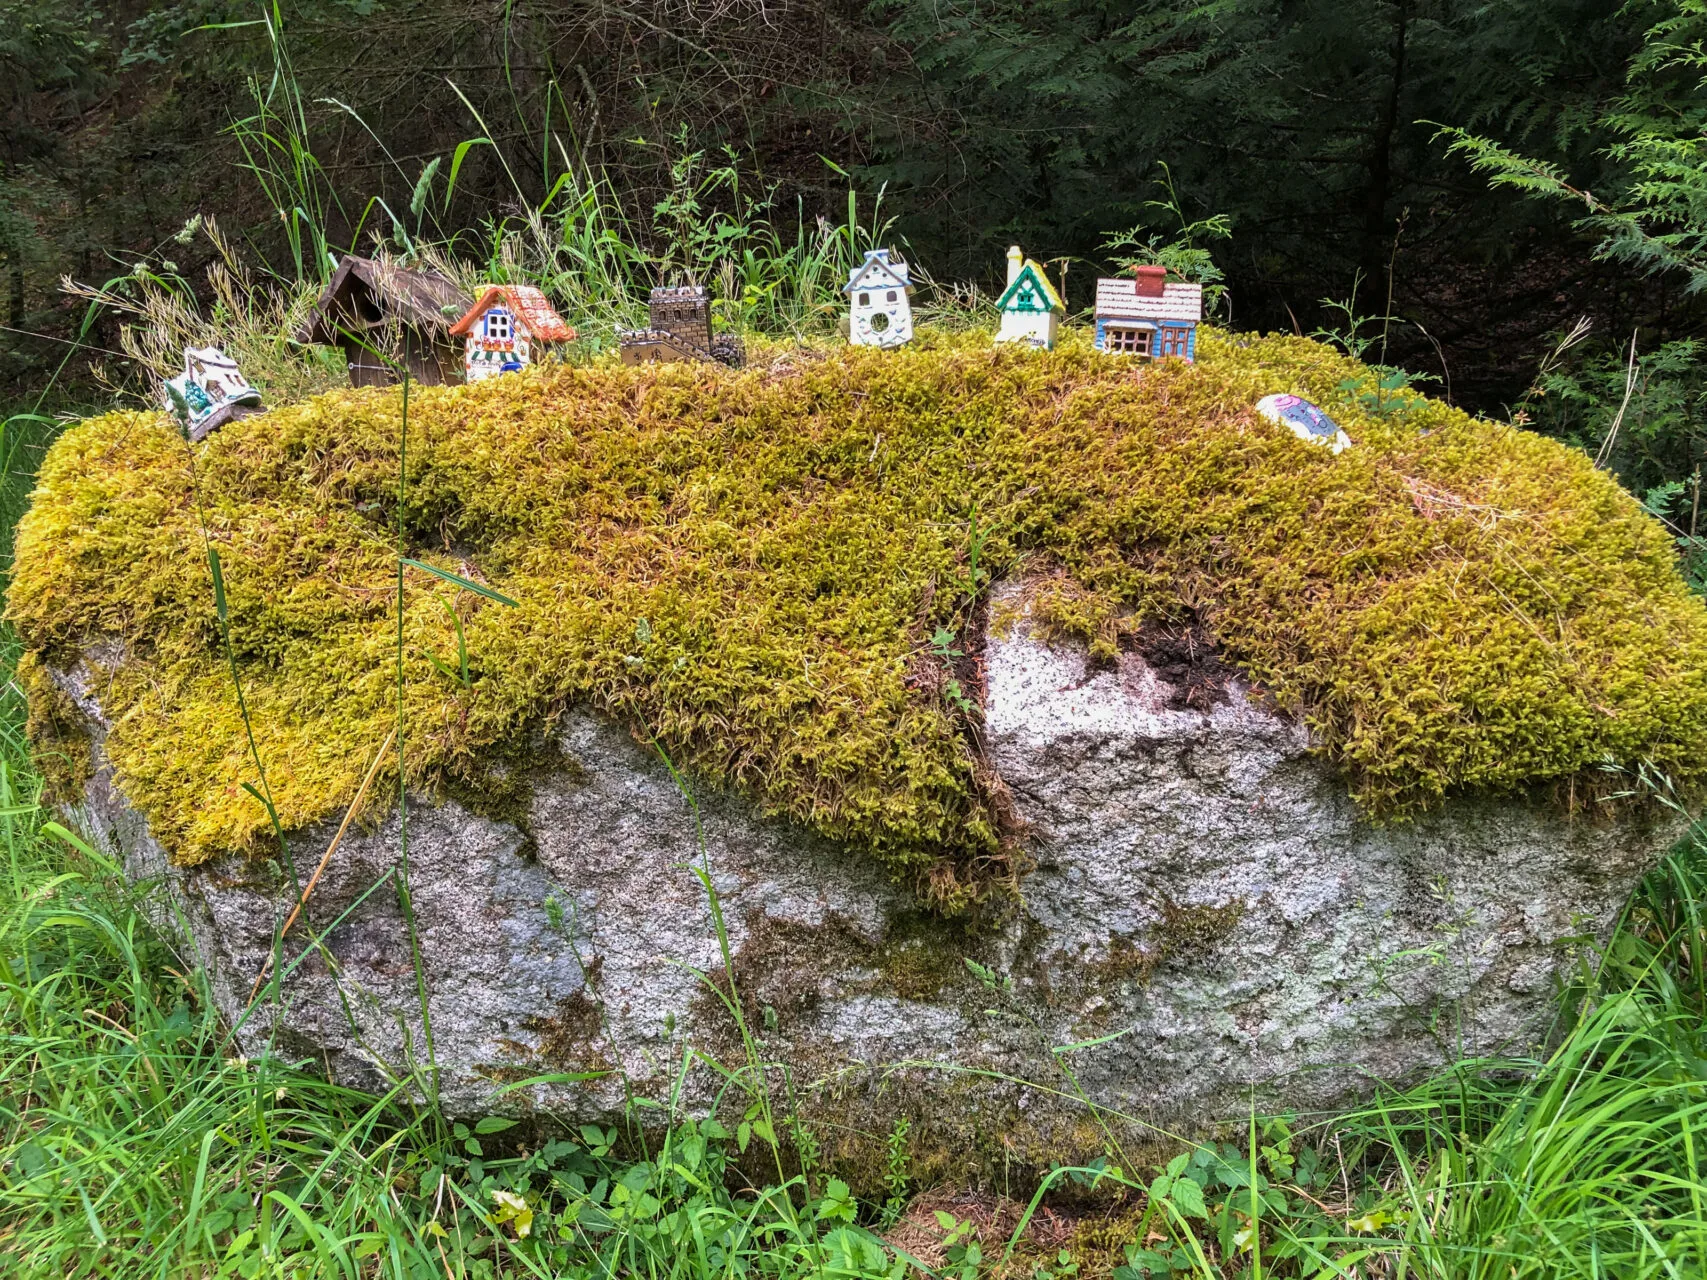 Driving or biking on San Juan Island, you'll find all kinds of whimsical things like these small ceramic houses on a moss-covered rock.